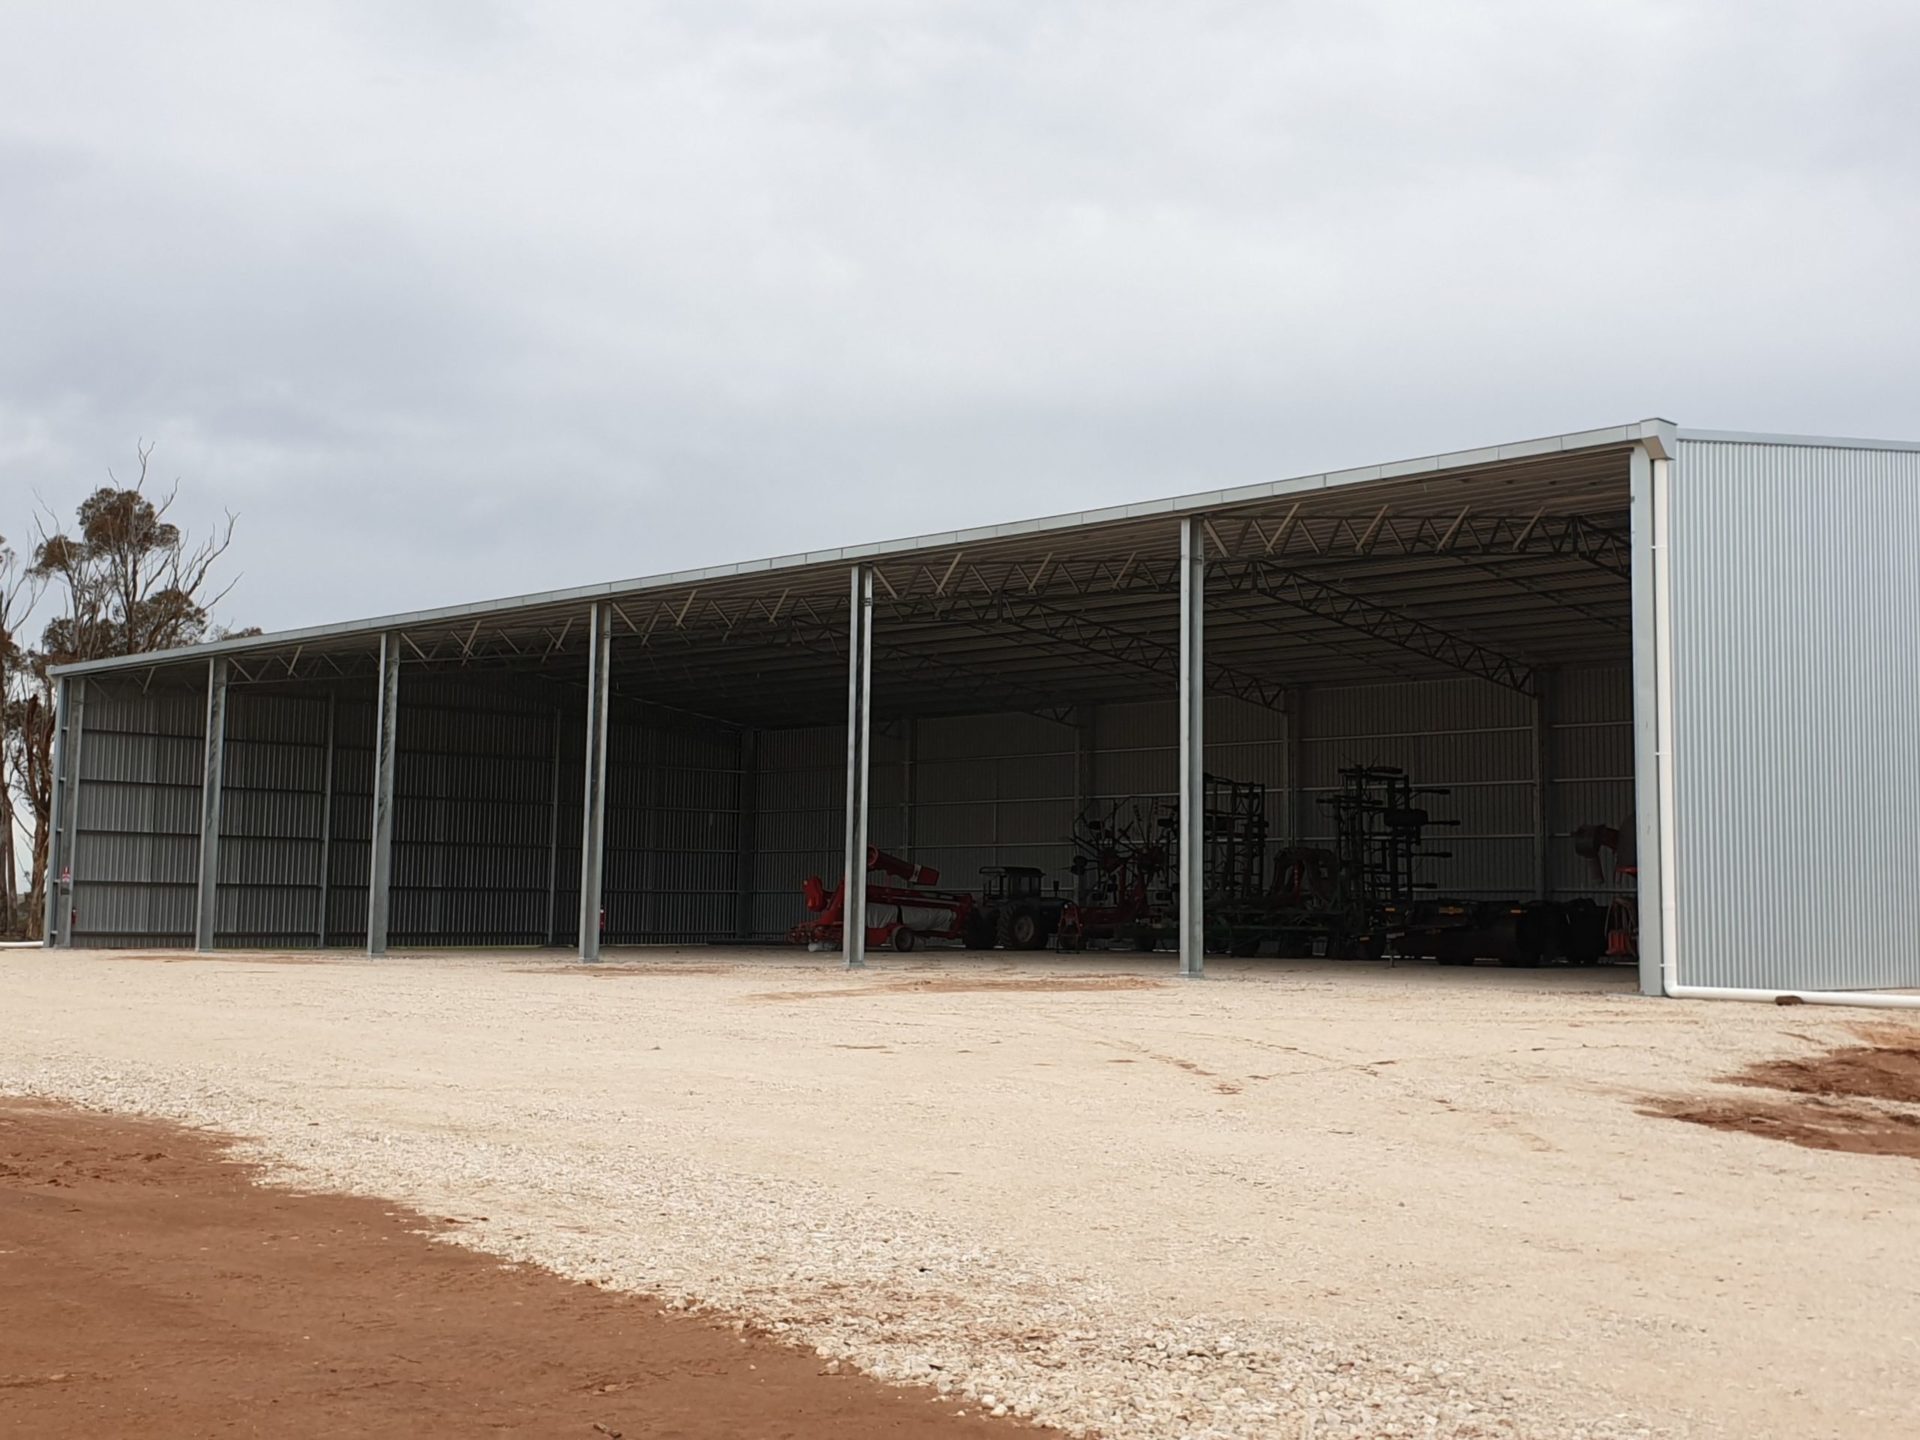 You are currently viewing 48m x 24m x 7.5m open-front hay shed